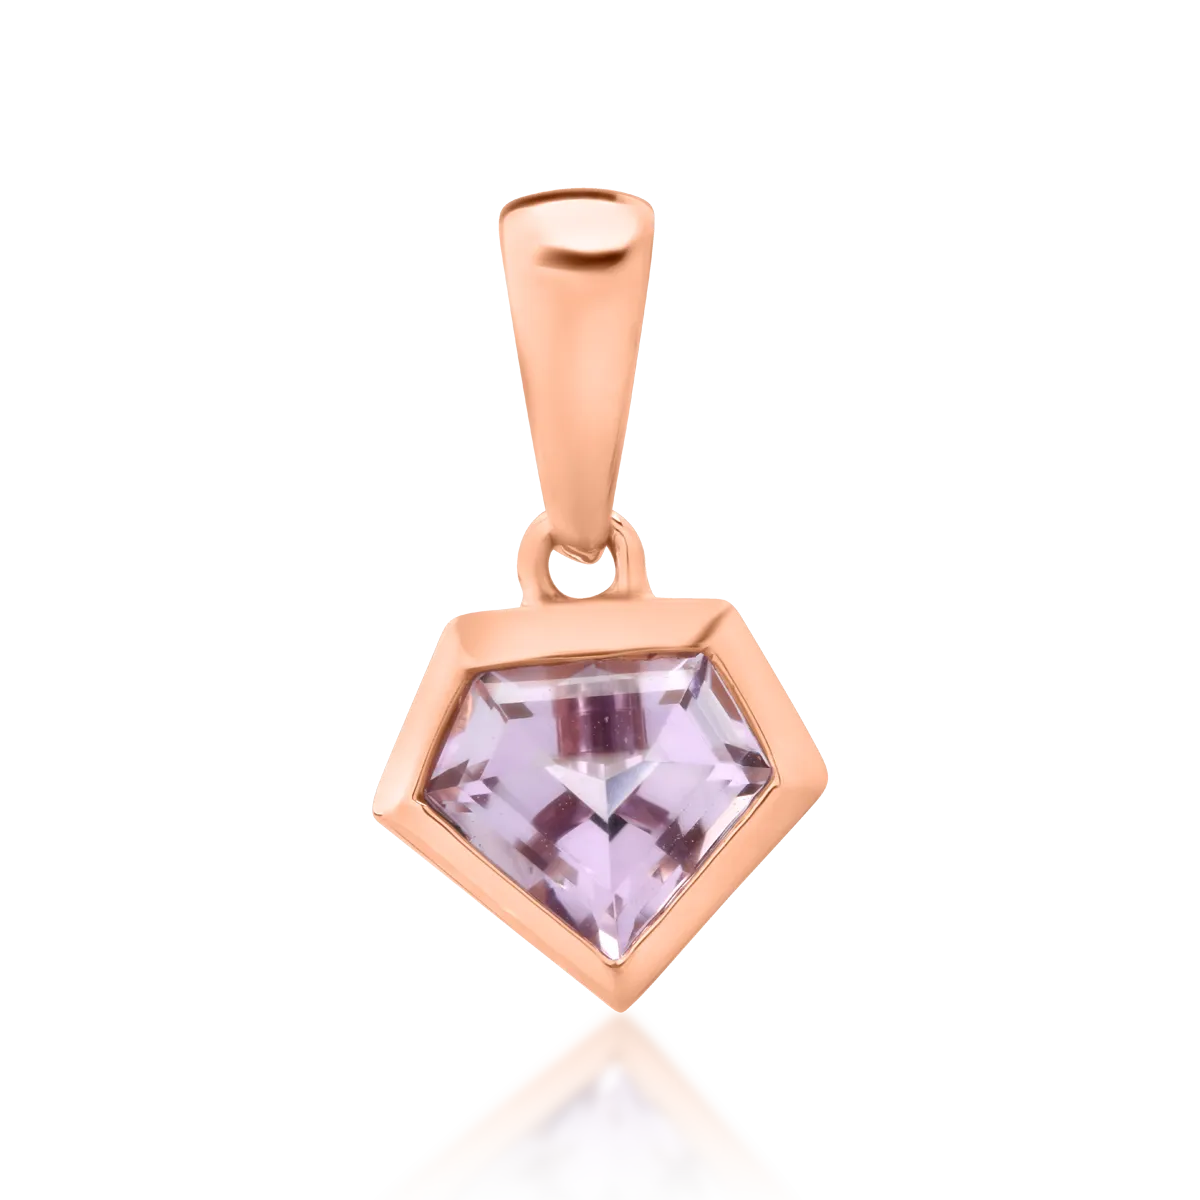 18K rose gold pendant with 0.5ct pink amethyst